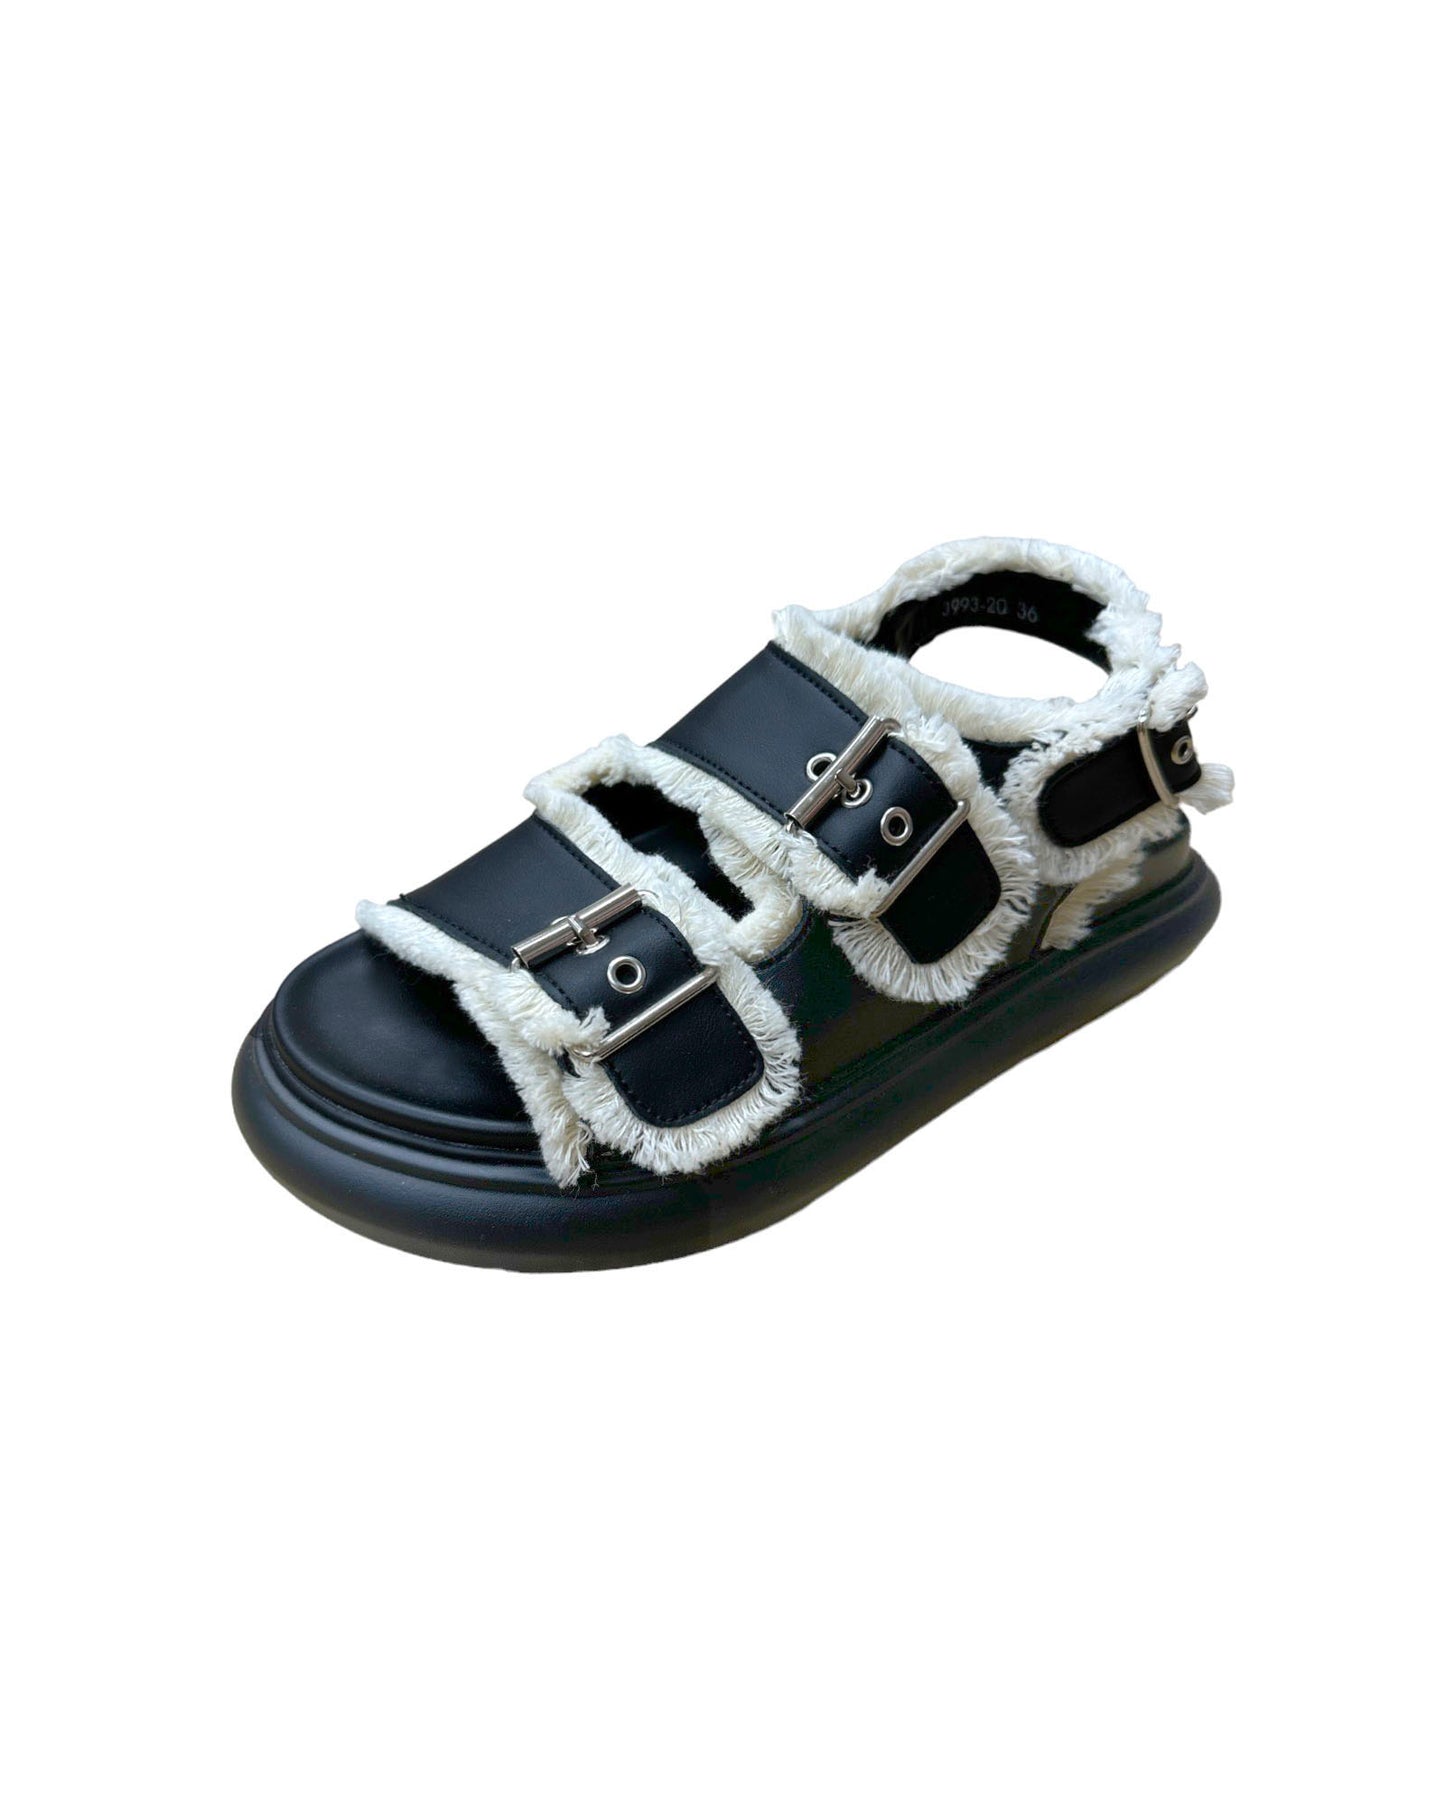 black PU leather w/ ivory tassels strappy sandals *pre-order*